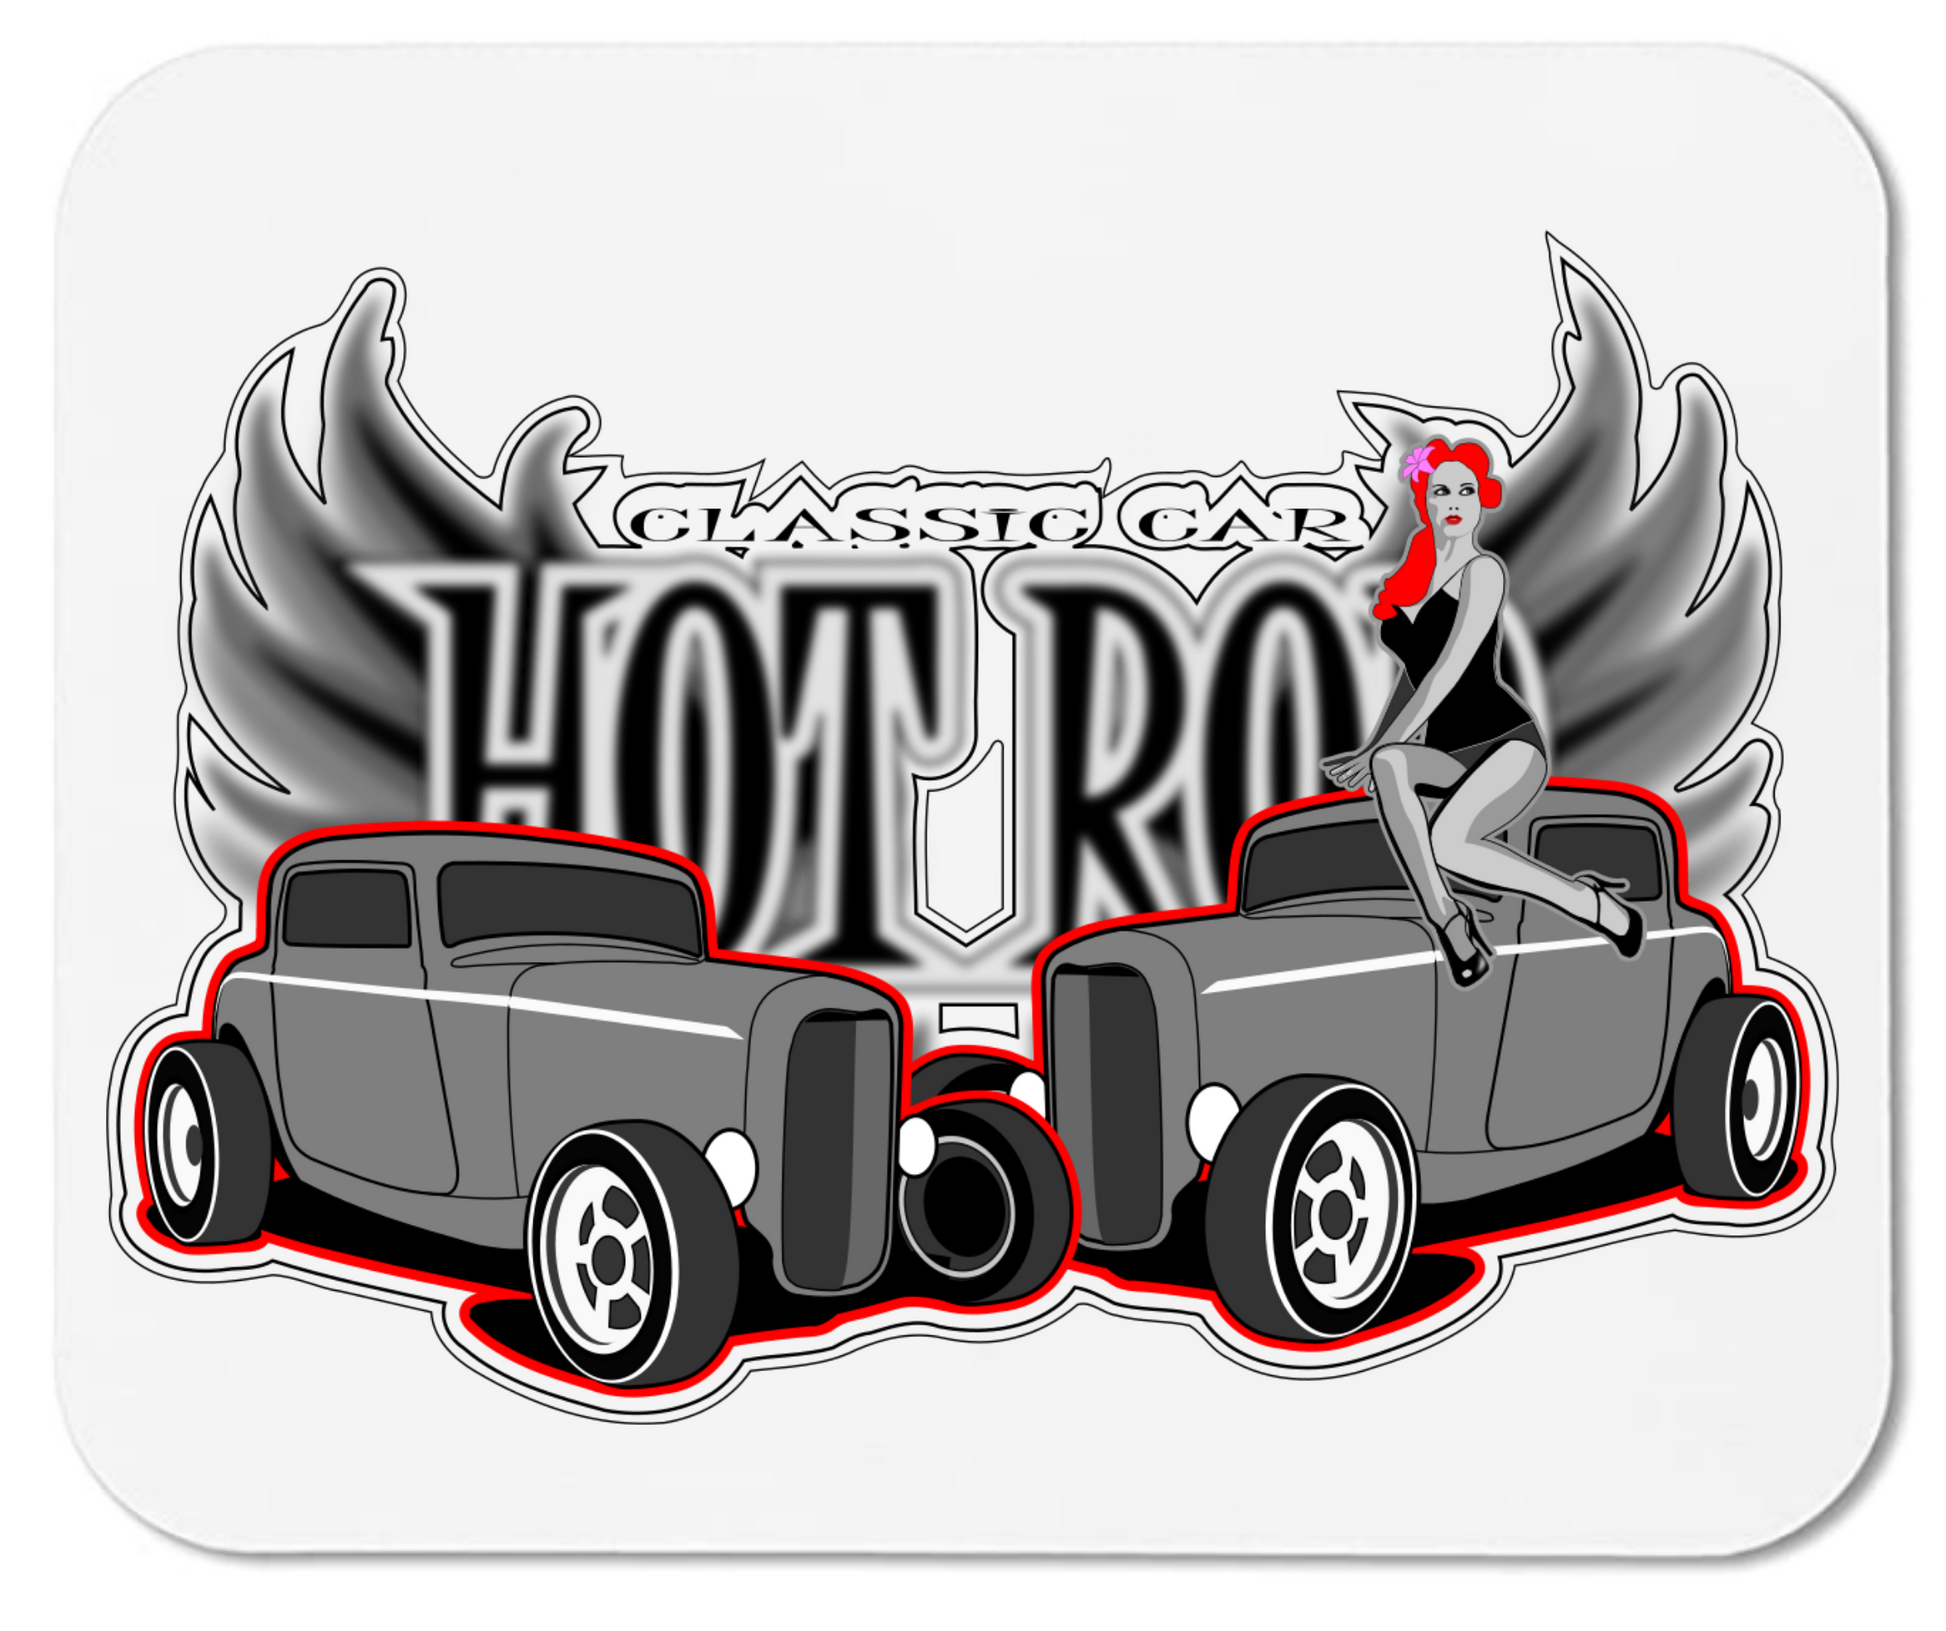 Double Hot Rod - Mouse Pad - Mister Snarky's